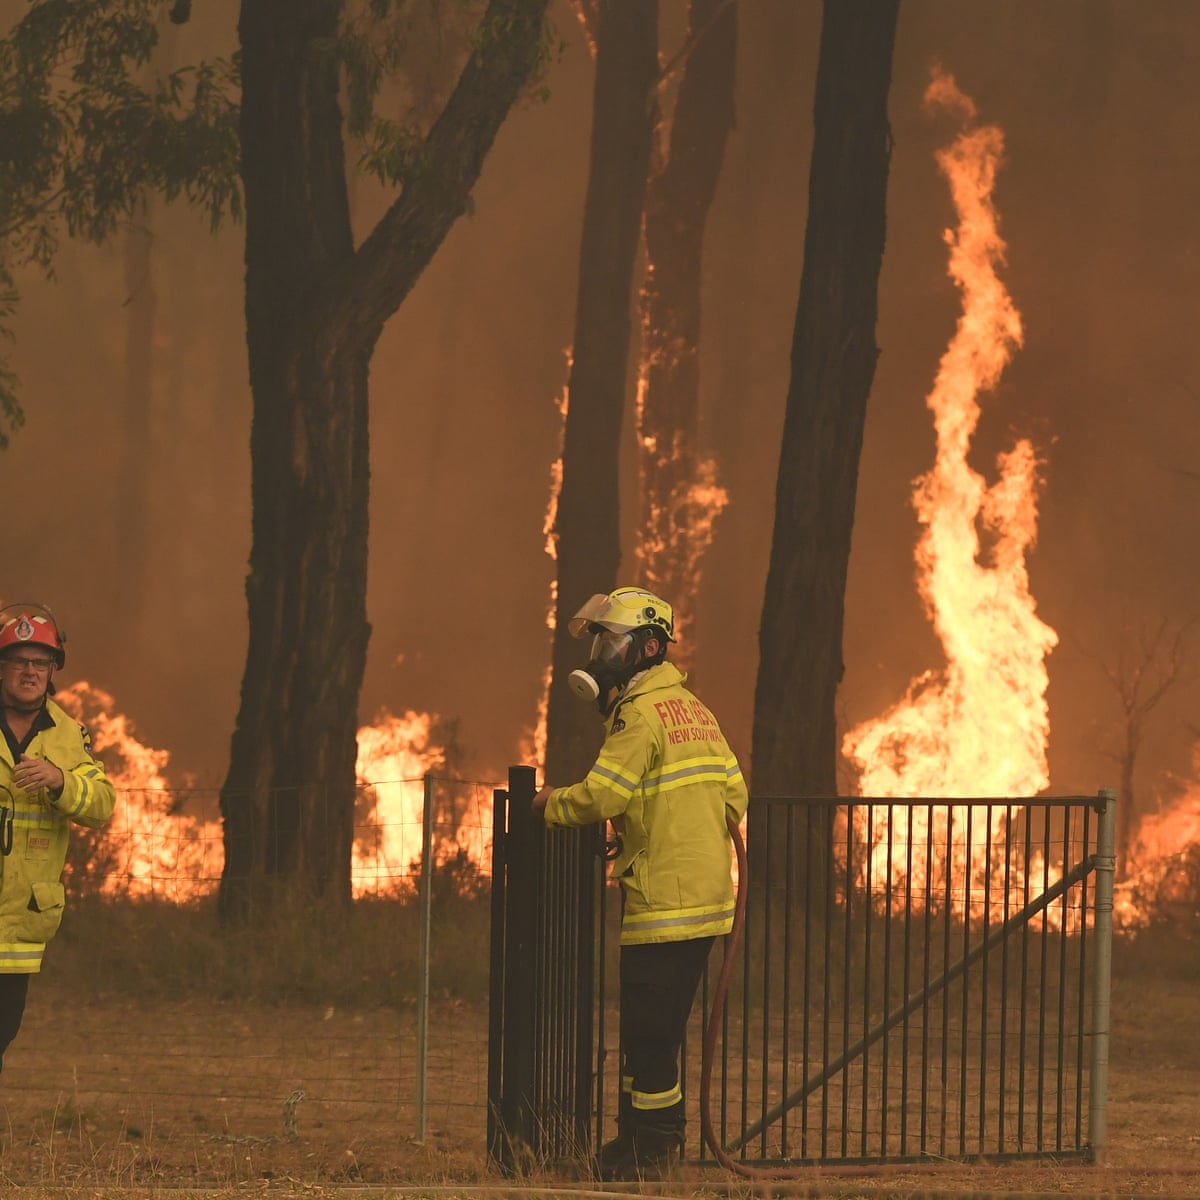 Bushfires Australia How You Can Donate And Help The Volunteer Firefighters Bushfires The Guardian